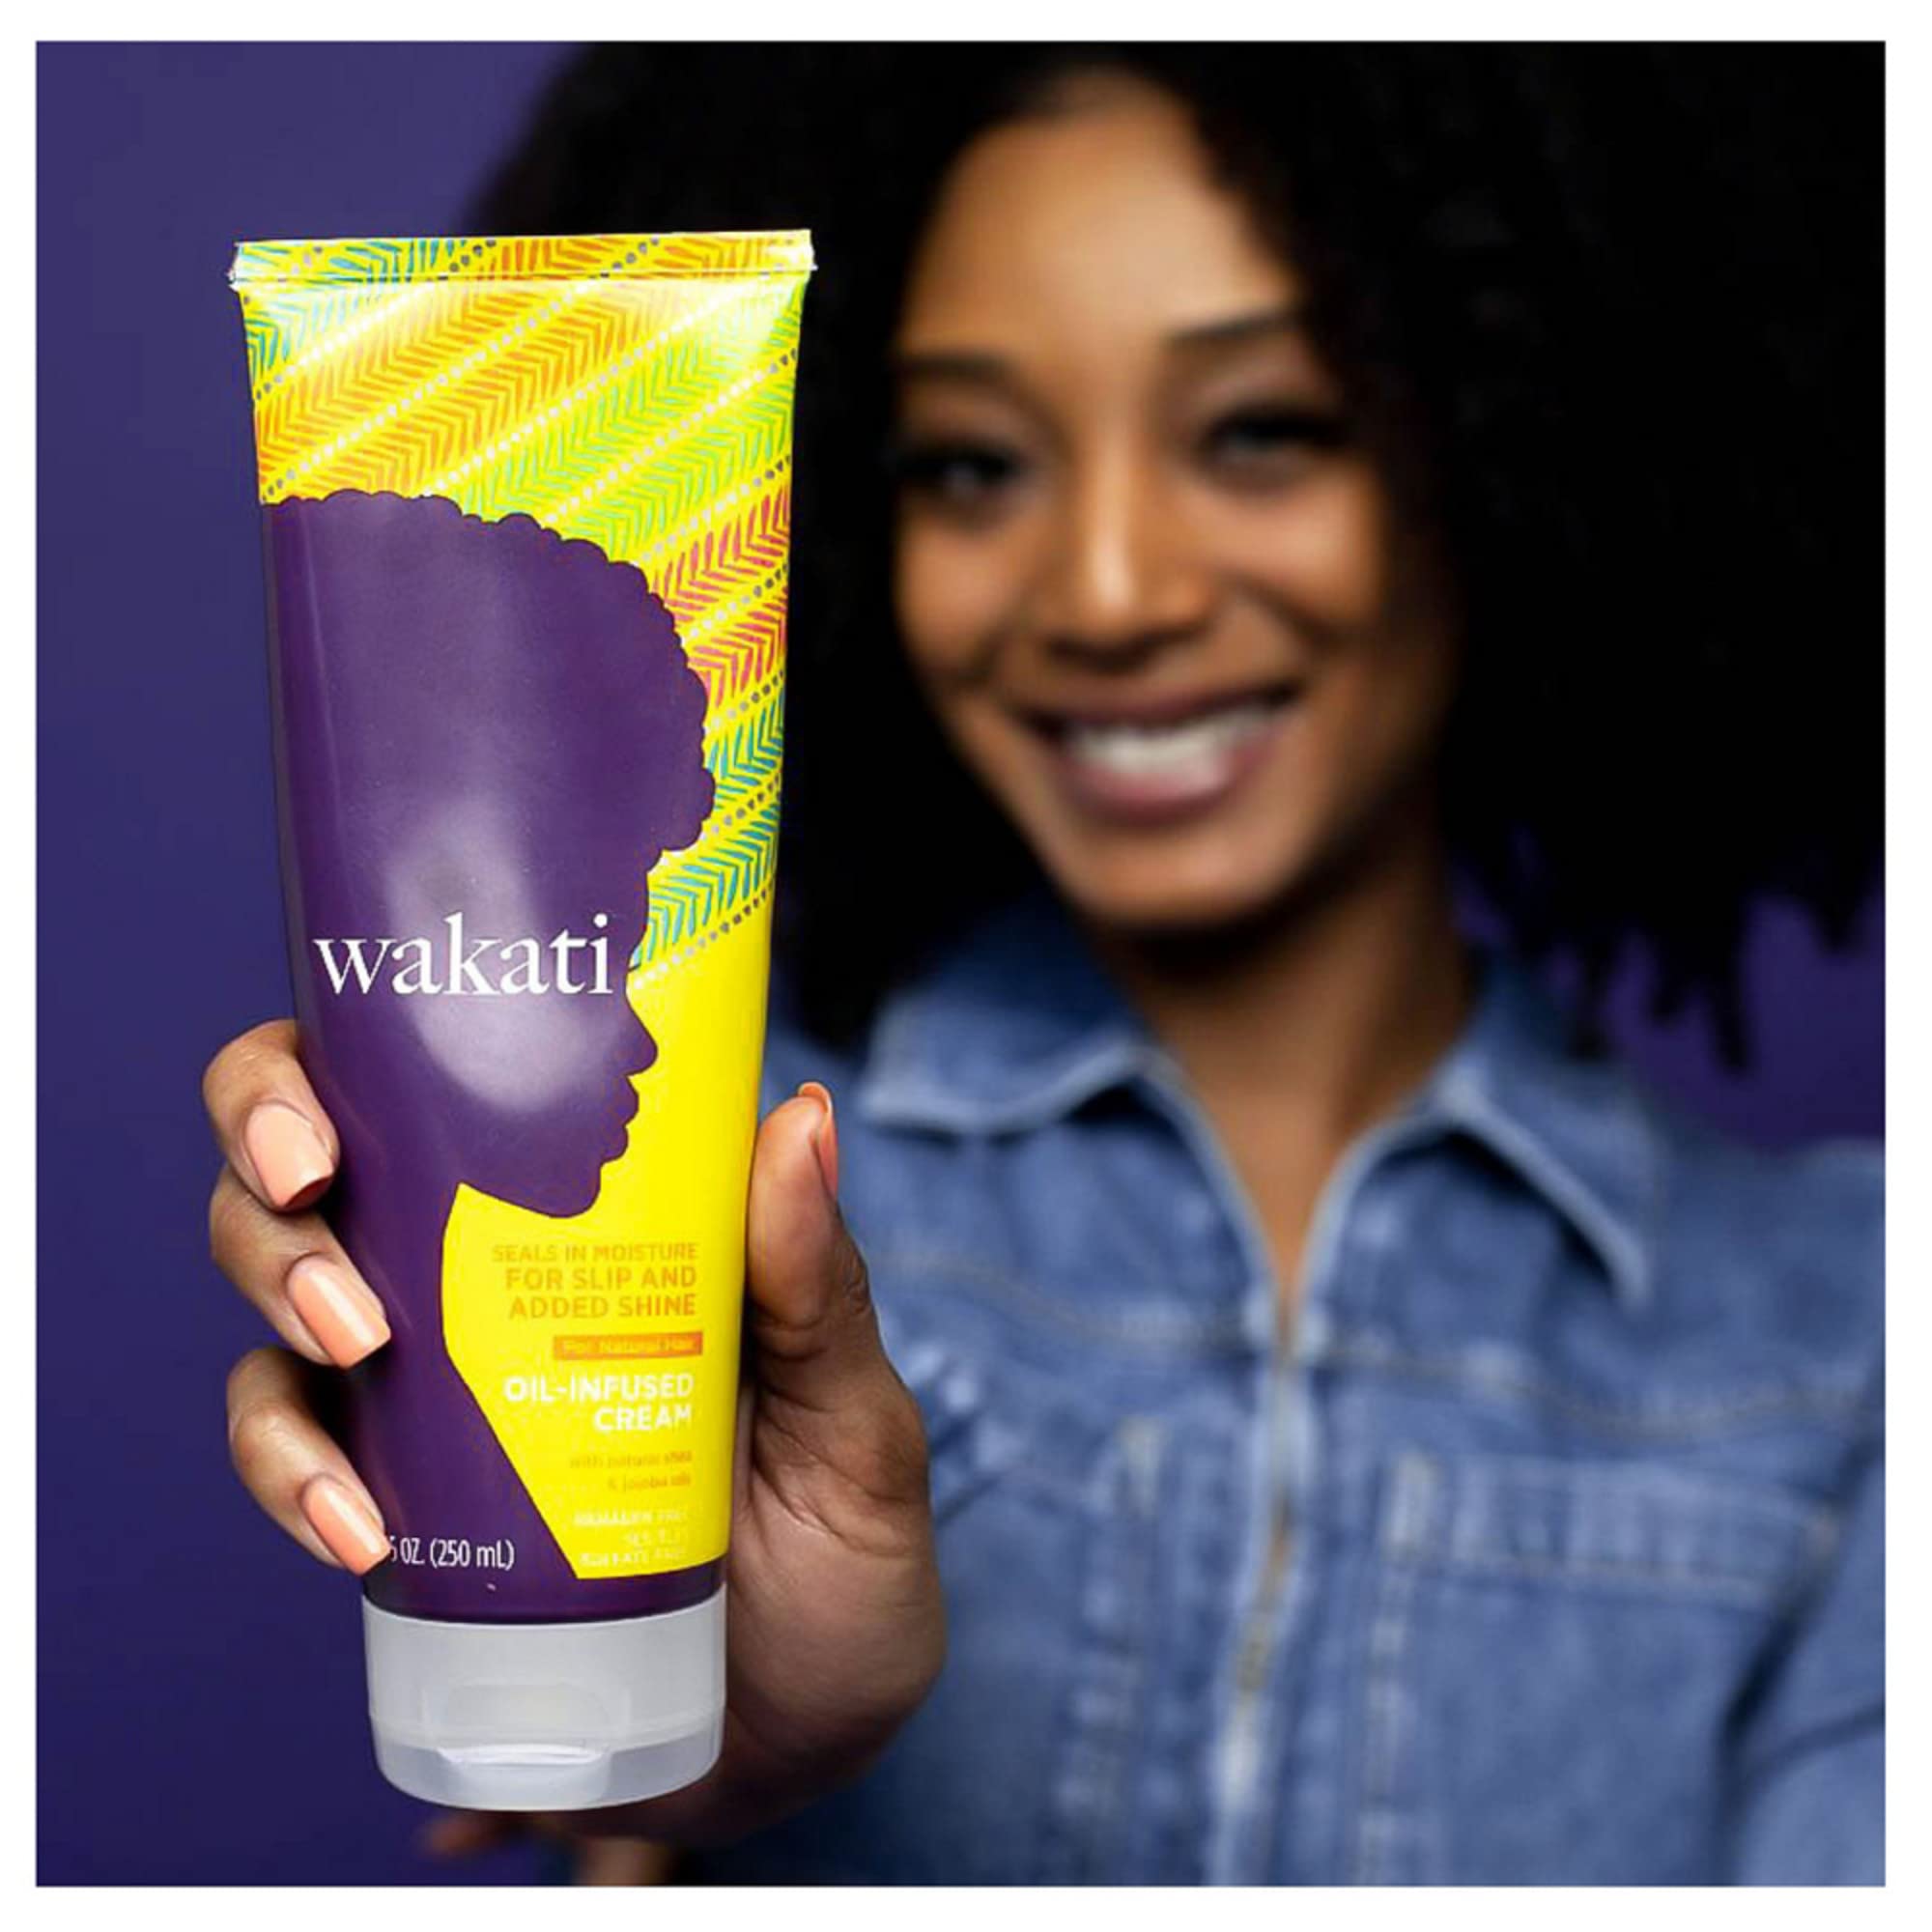 Wakati Oil-Infused Hair Cream, 8.45 Ounce, Deep Conditioner Curl Cream, Natural Hair Moisturizer, Deep Conditioner for Dry, Damaged Hair, Sulfate Free, Paraben Free